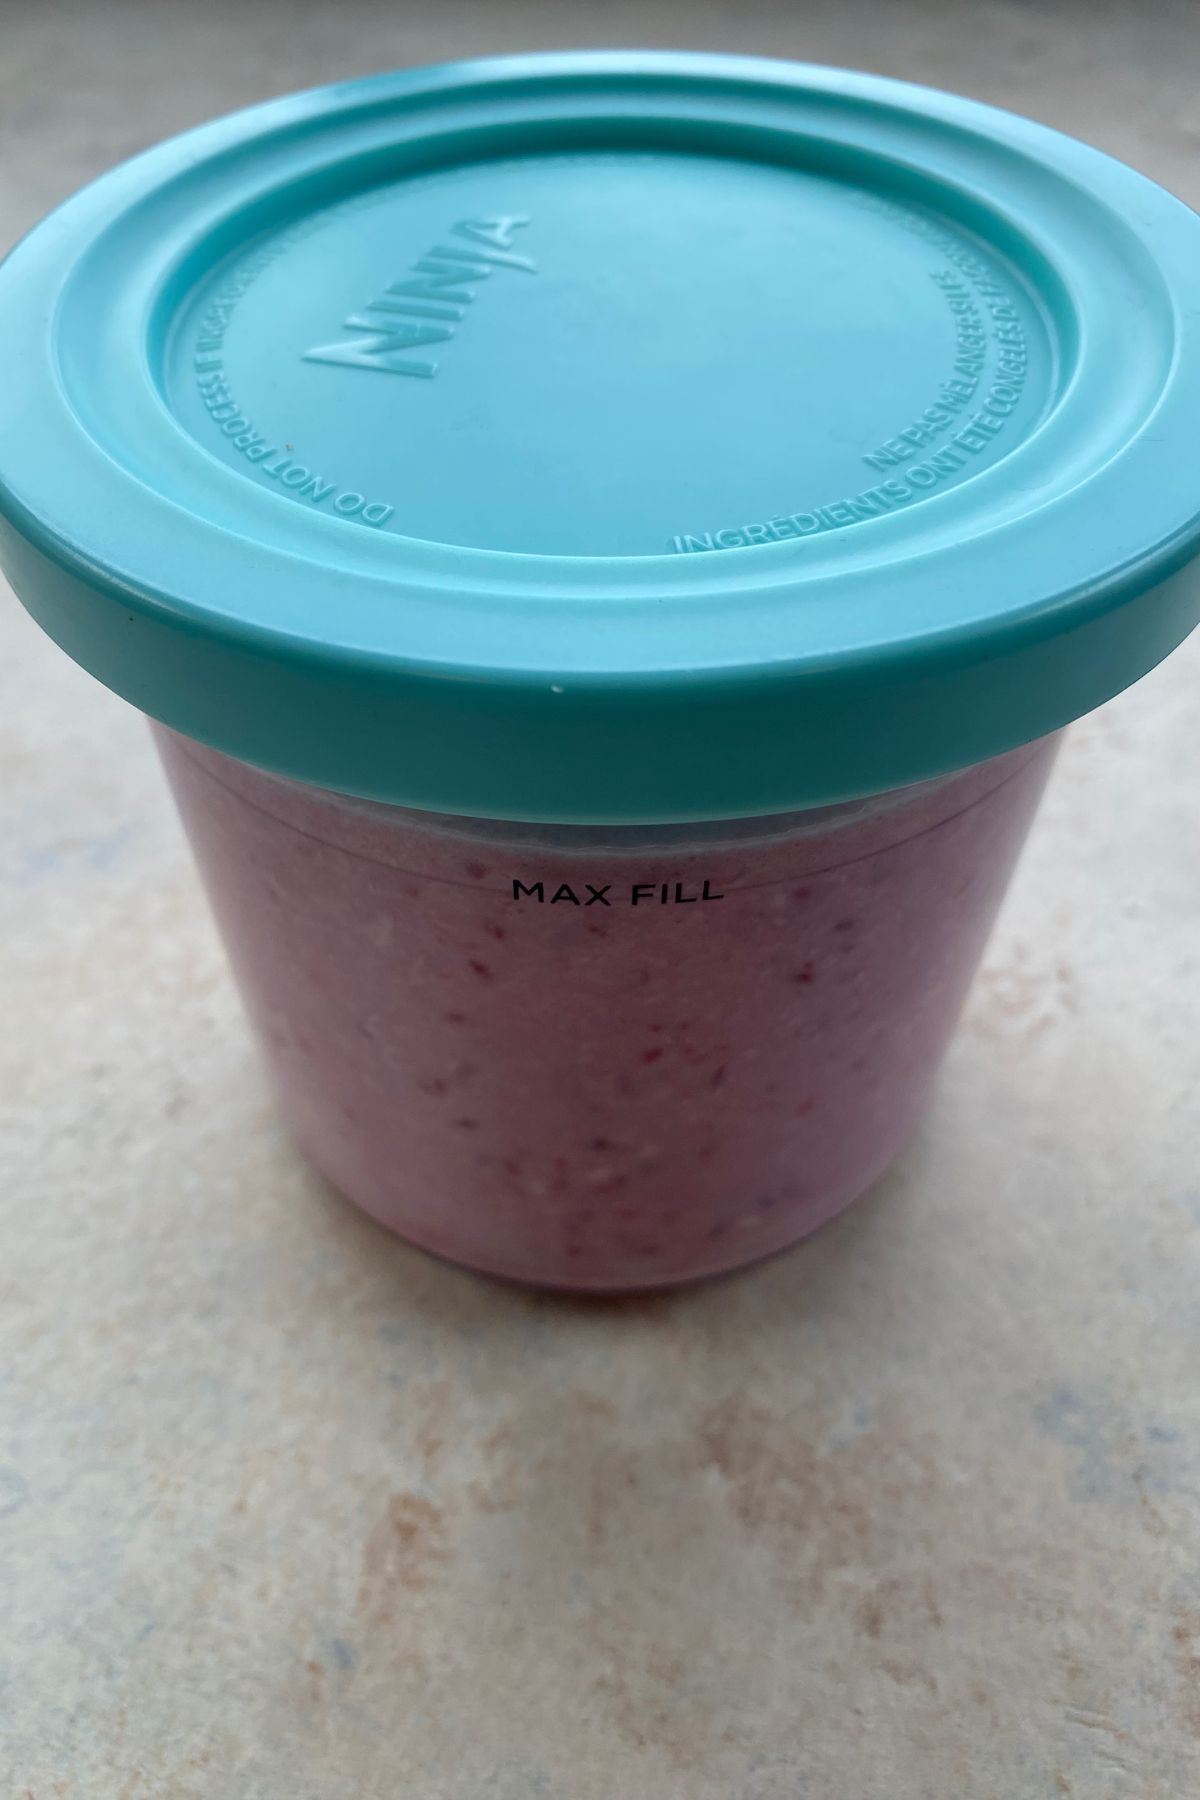 A pink container with a lid sitting on a table.